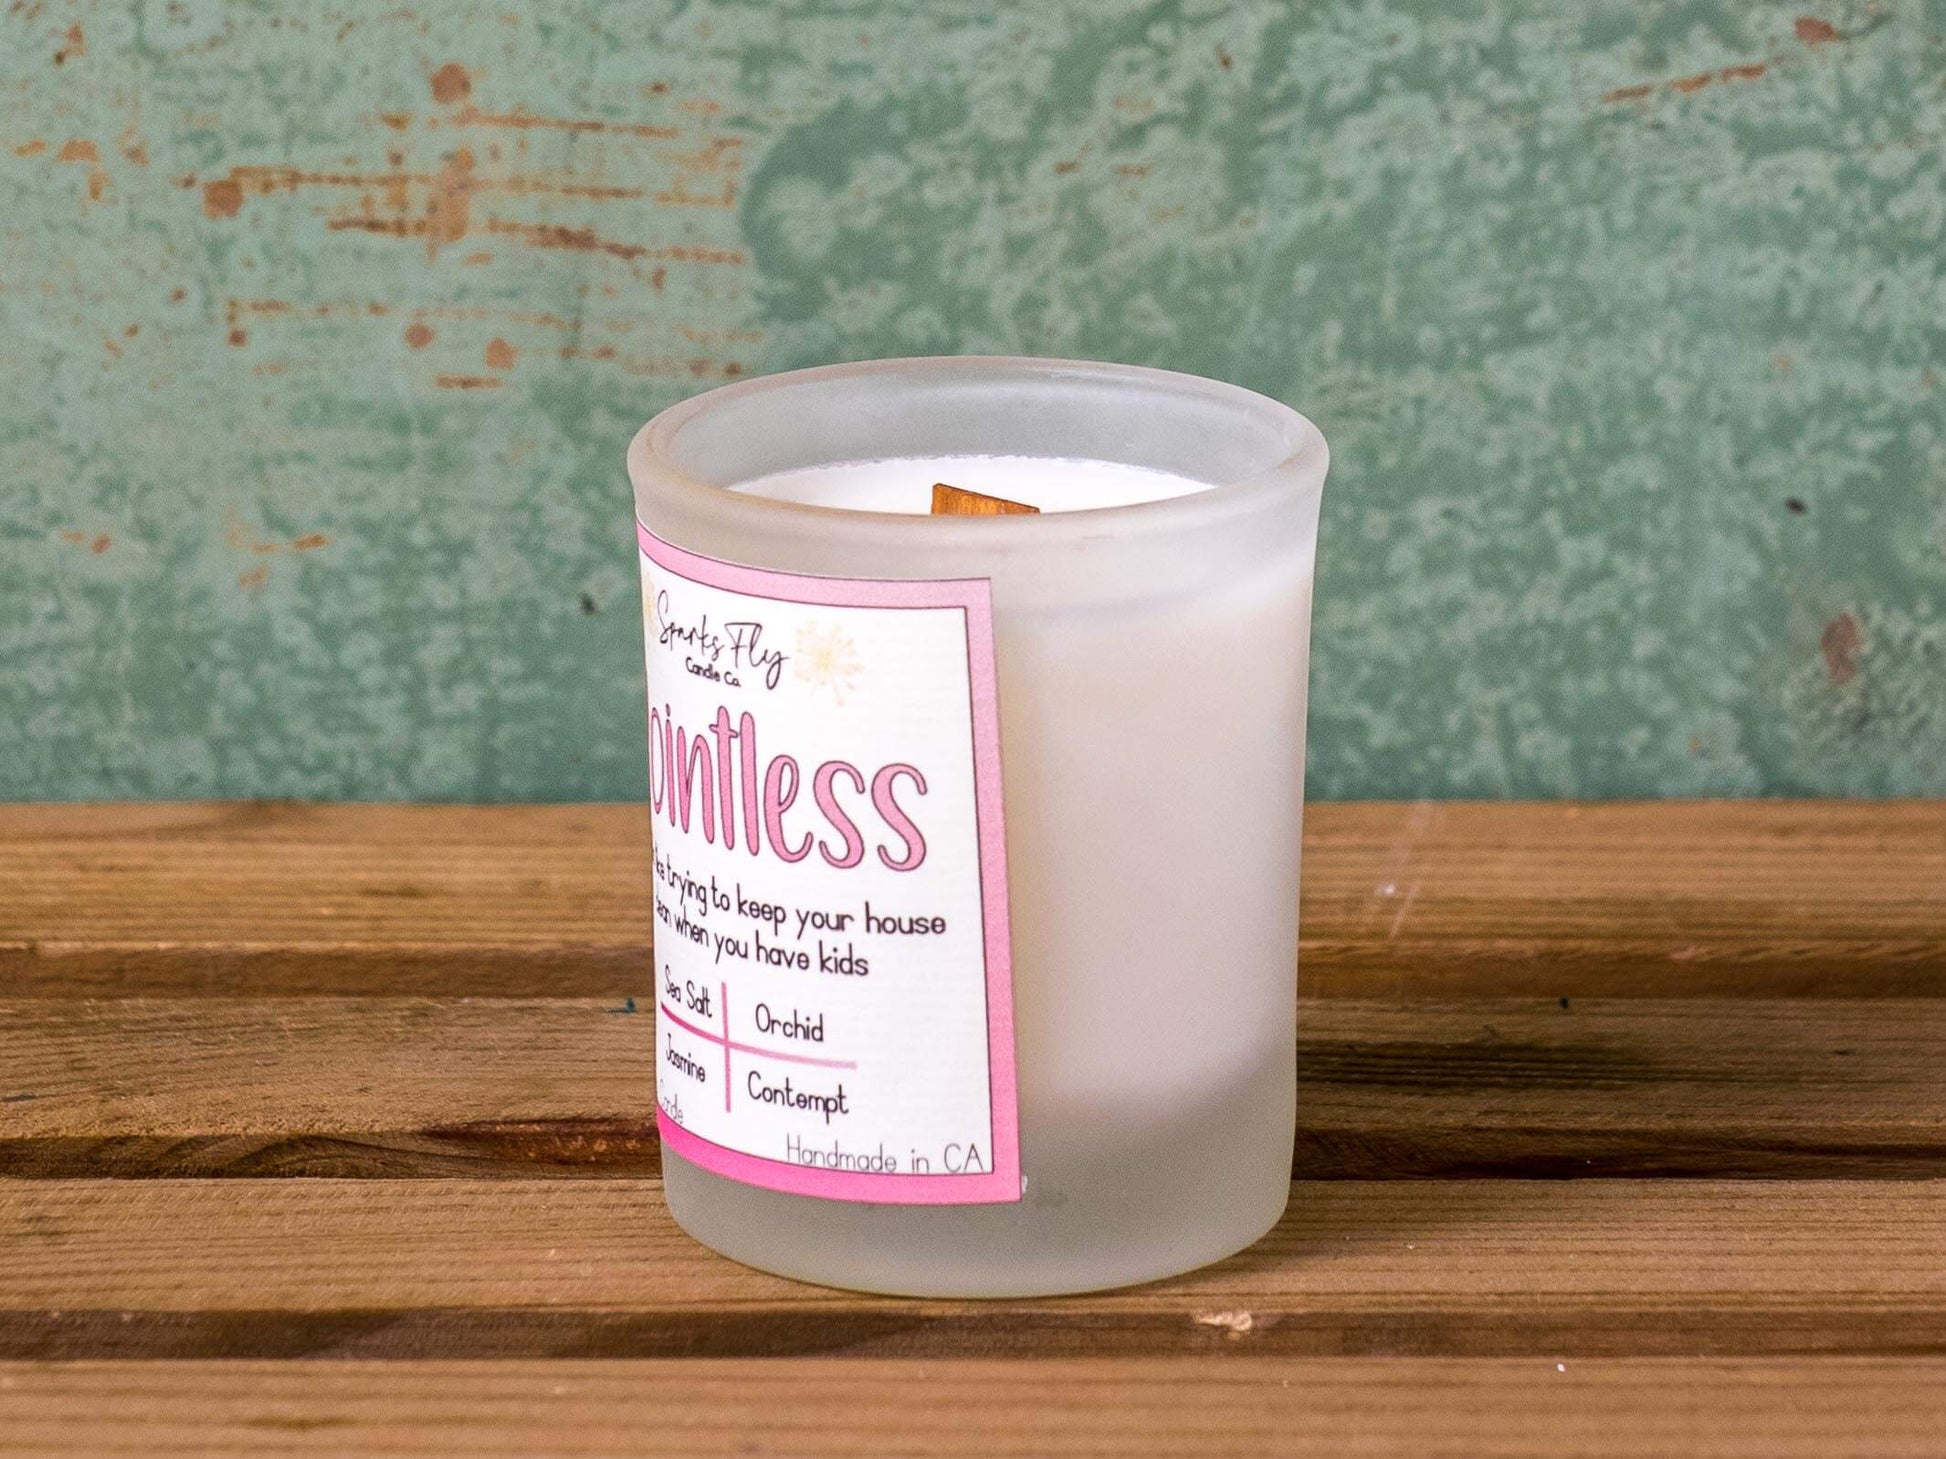 Pointless Candle - Capturing the never-ending cycle of tidying up in a kid-filled home.